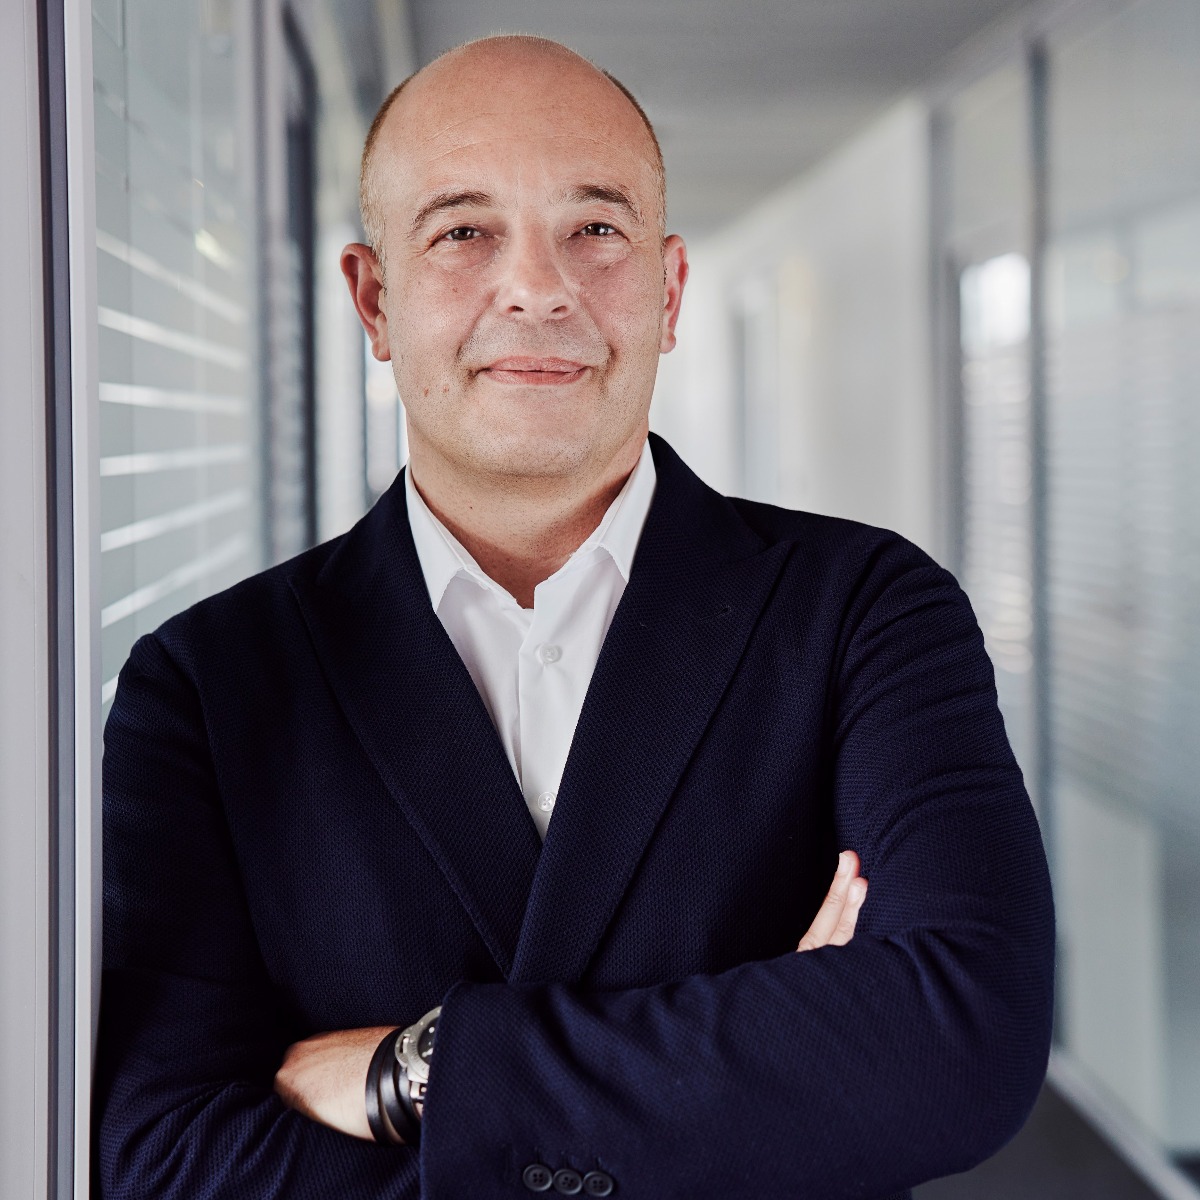 Cosimo De Carlo is appointed as Managing Director of Tietoevry Create: bit.ly/4blxyRS “I'm very excited to embark on this new chapter in Tietoevry Create that operates globally and has a strong customer base combined with a unique skills and capabilities.”